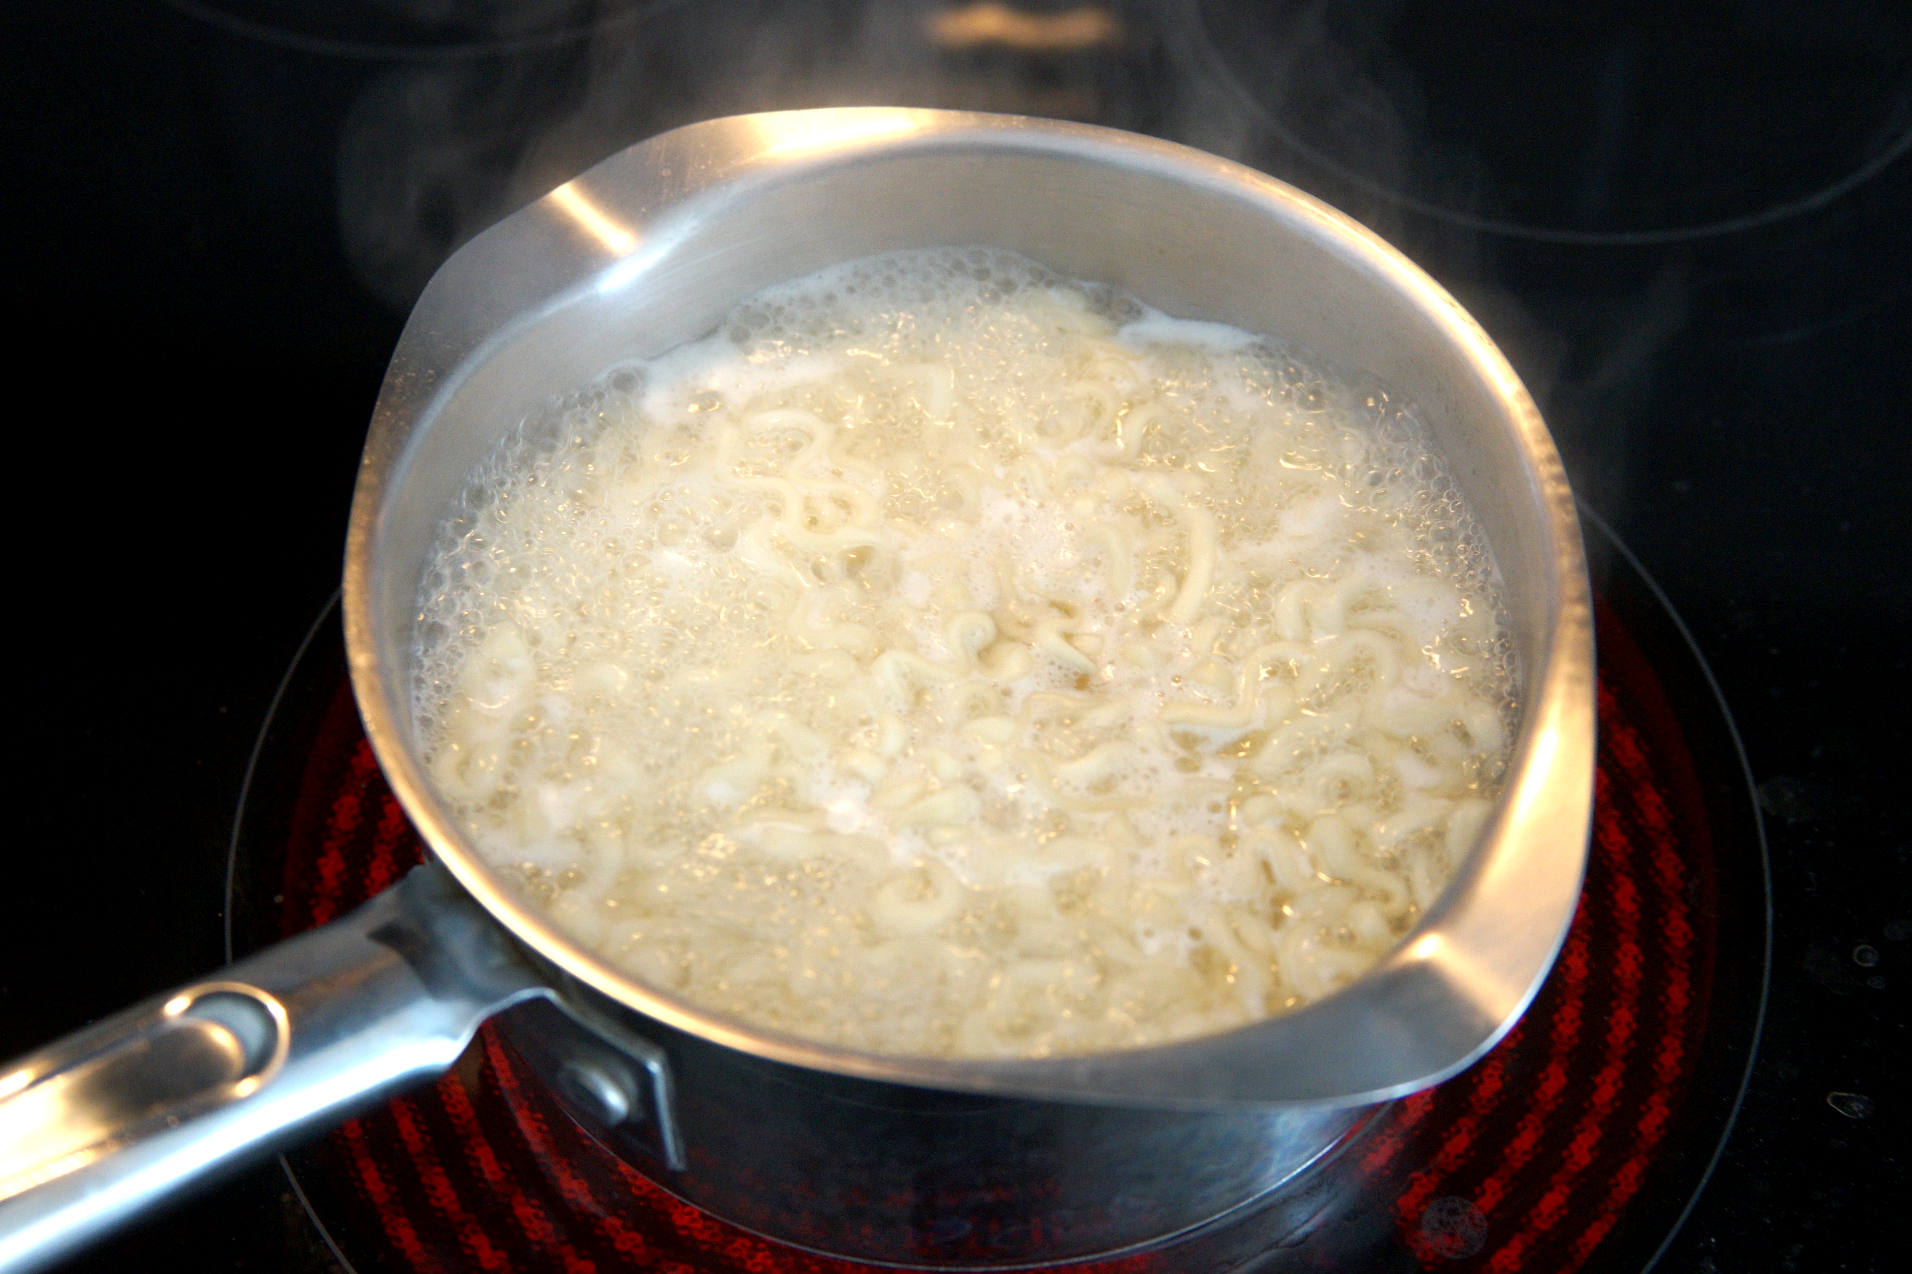 Buldak fire noodles cooking on the stove top